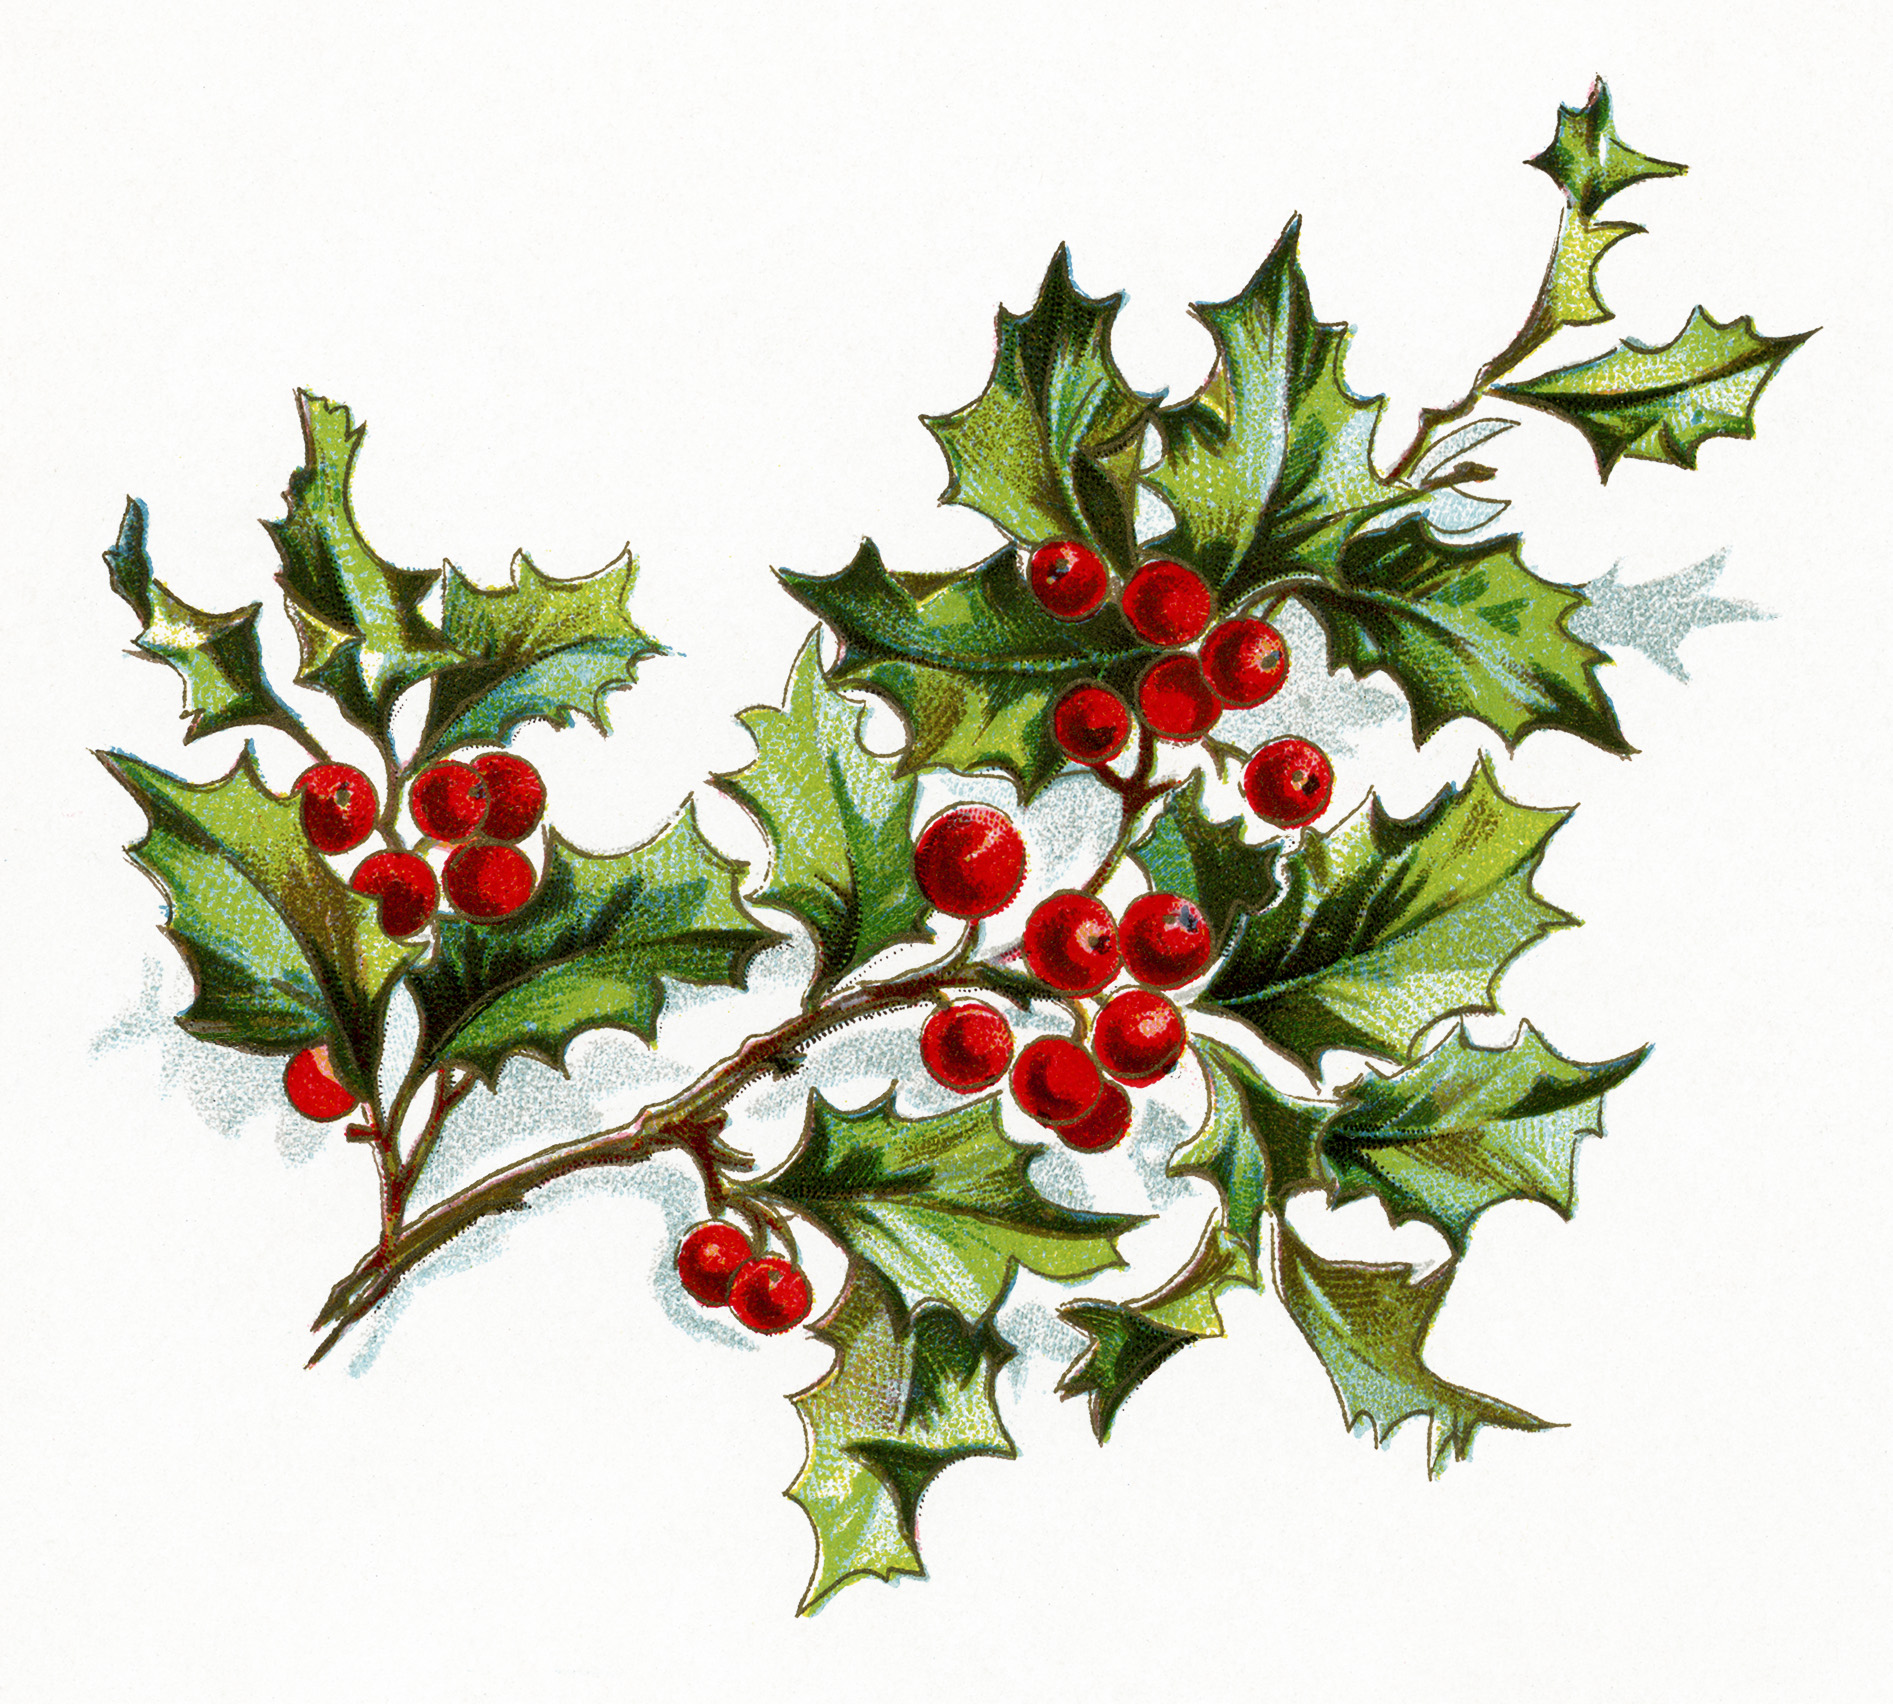 This Lovely Sprig Of Holly And Berries Is From A Book Of Poetry Titled